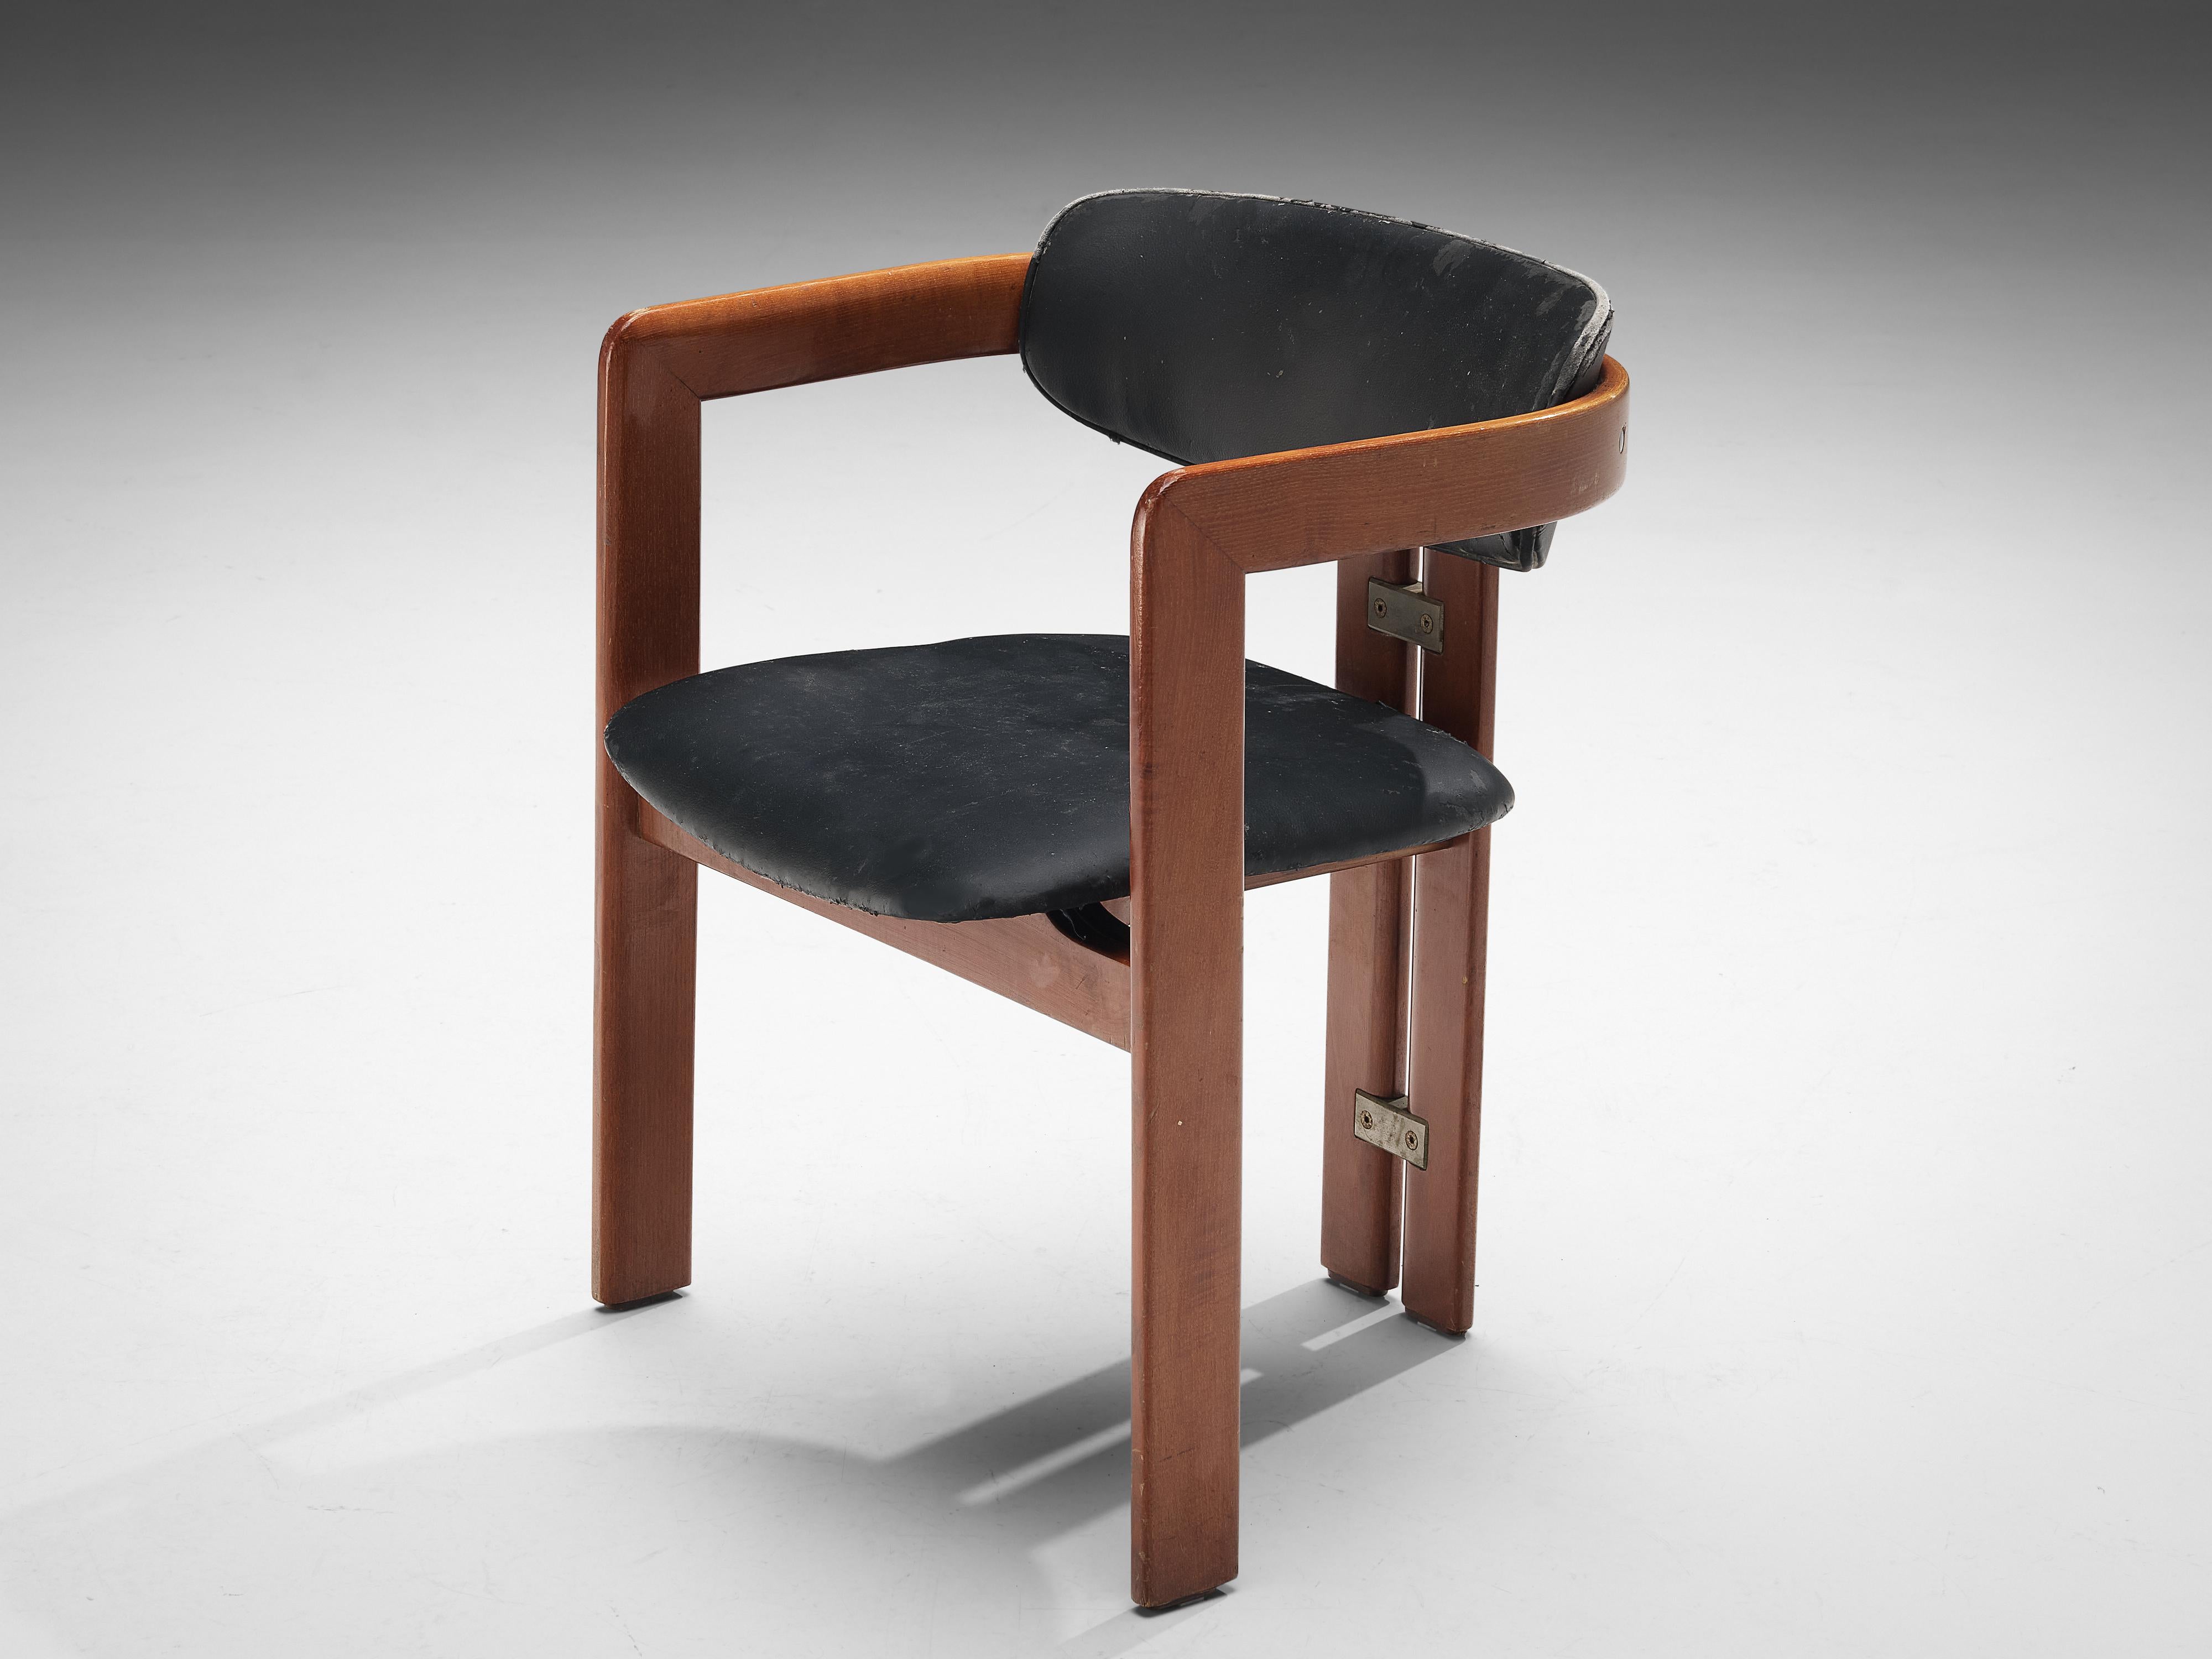 Augusto Savini for Pozzi, dining chair model 'Pamplona', wood, upholstery, aluminum, Italy, designed in 1965 

'Pamplona' armchair in ash and dark upholstery. A characteristic design; simplistic yet very strong in lines and proportions. Wonderful